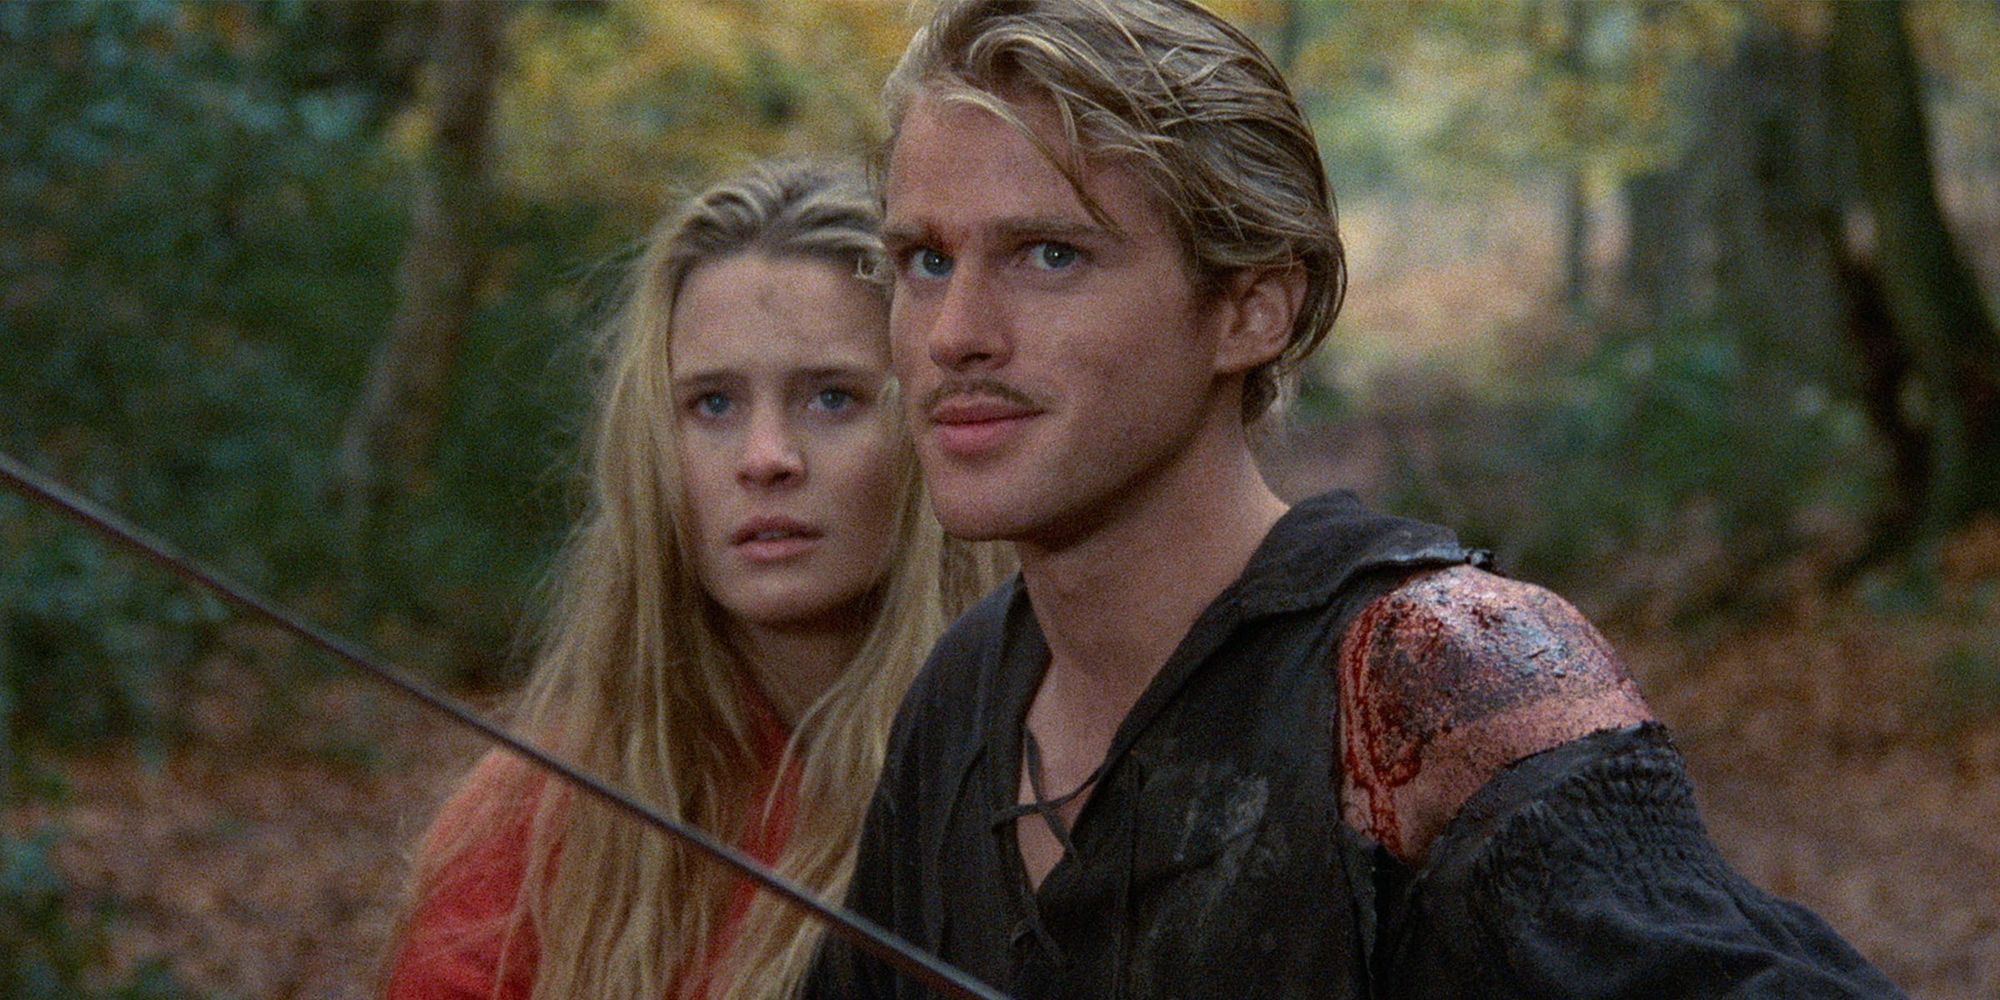 An Image From The Princess Bride